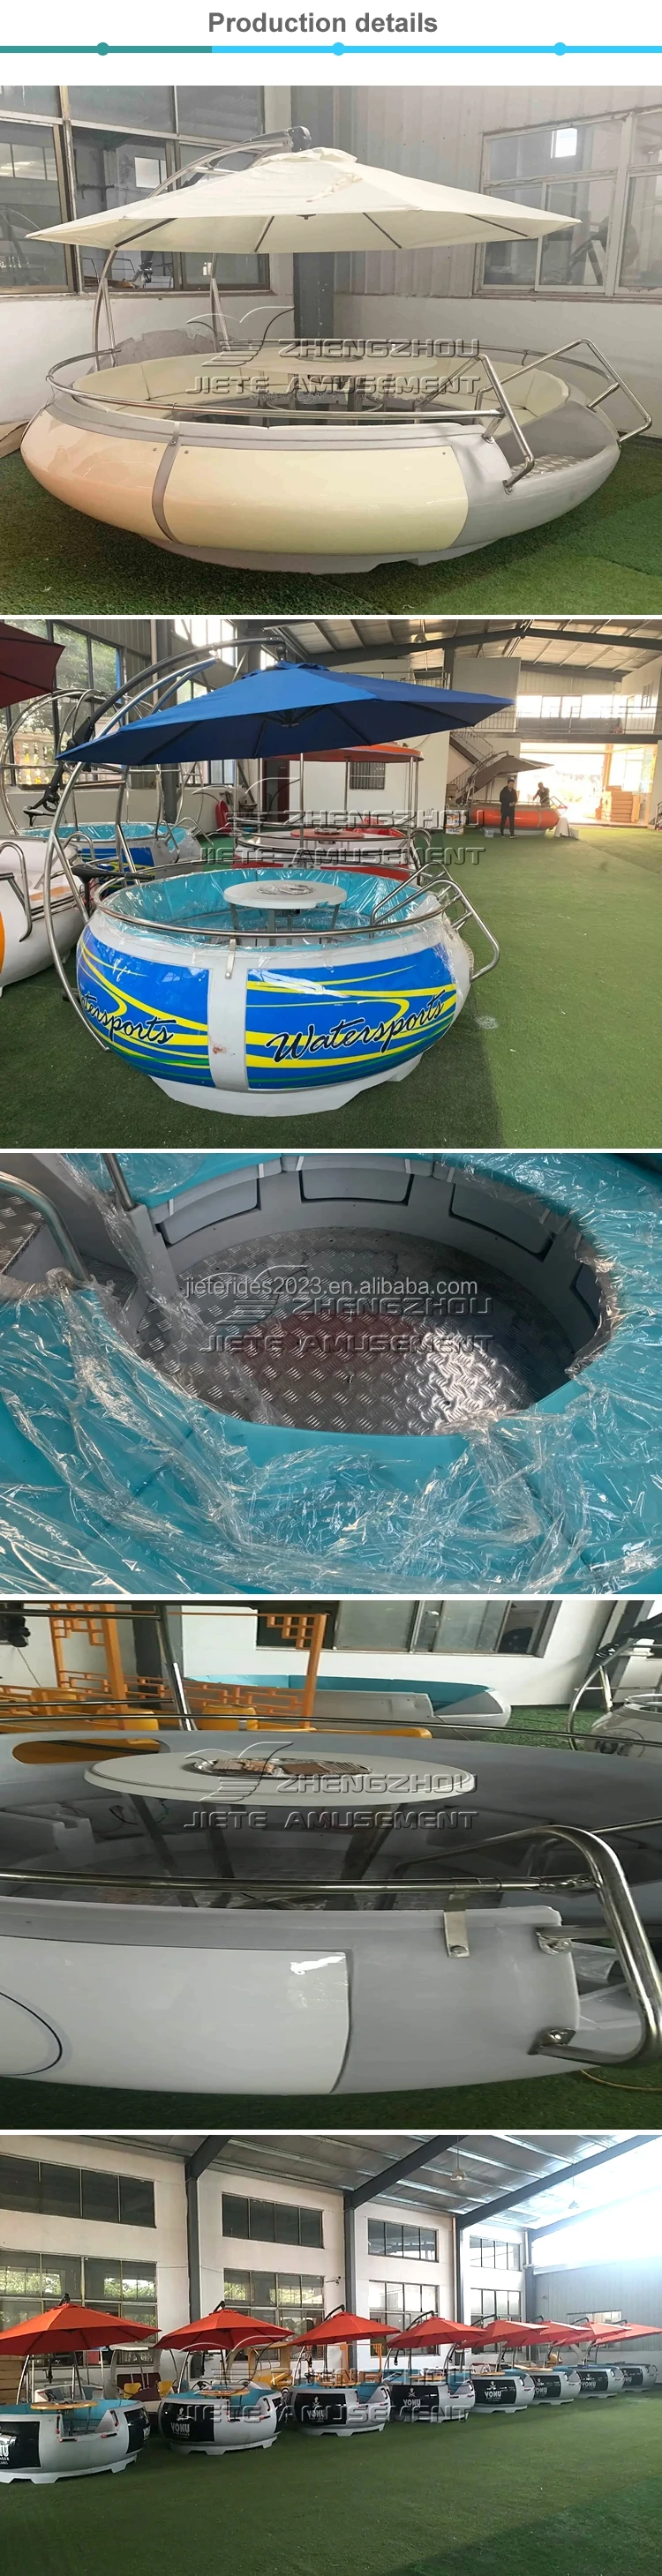 water play equipment leisure boat, BBQ boat party boat for water play factory direct sale